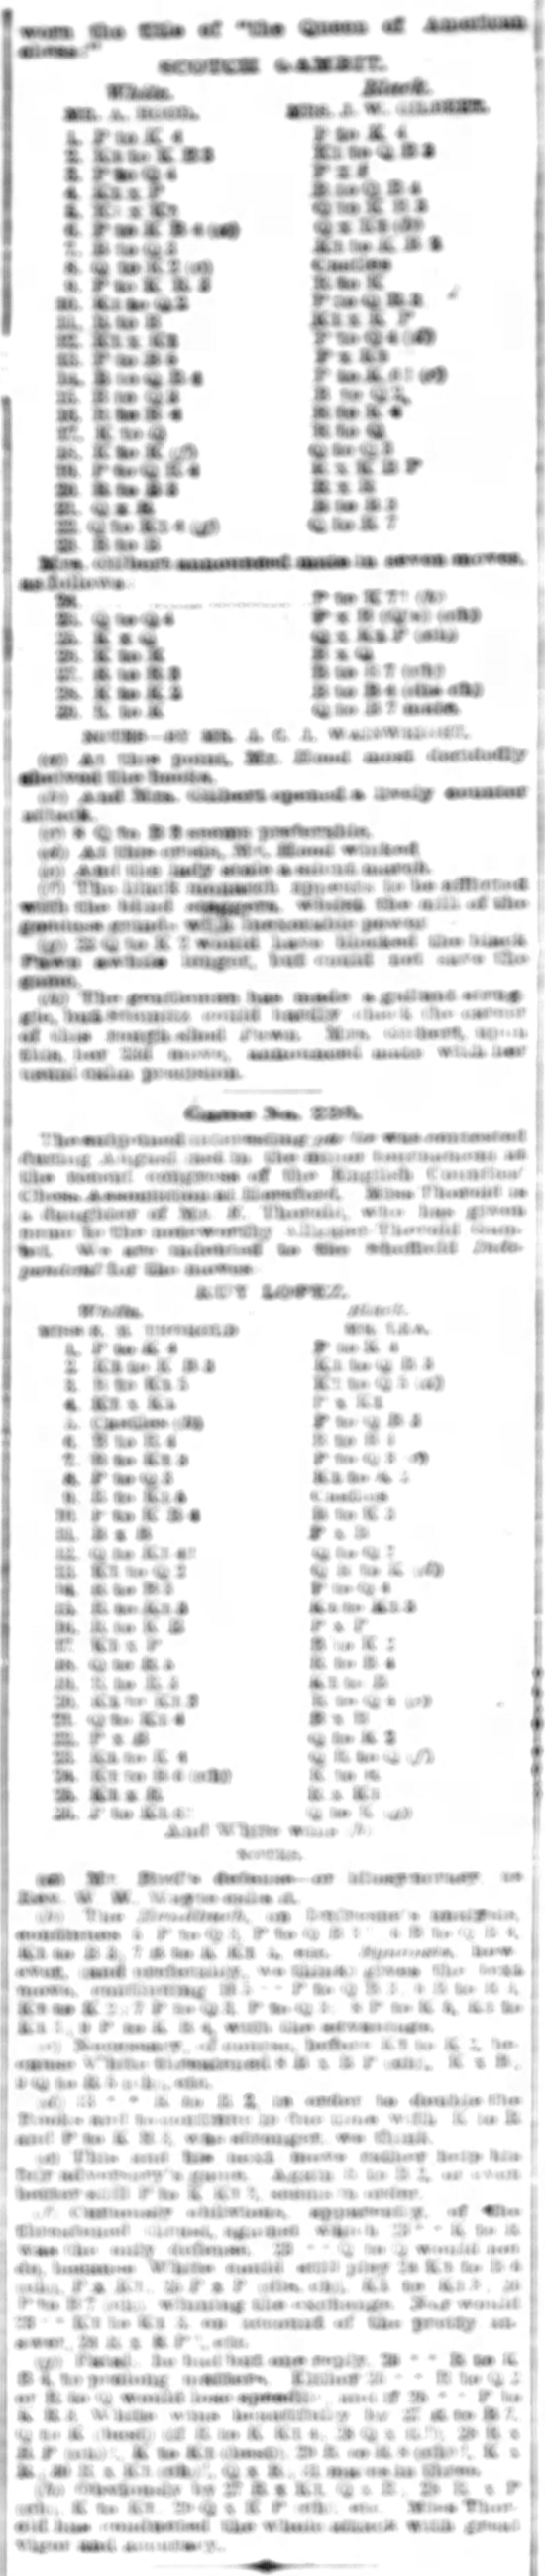 1885.10.04-02 New Orleans Times-Democrat.png